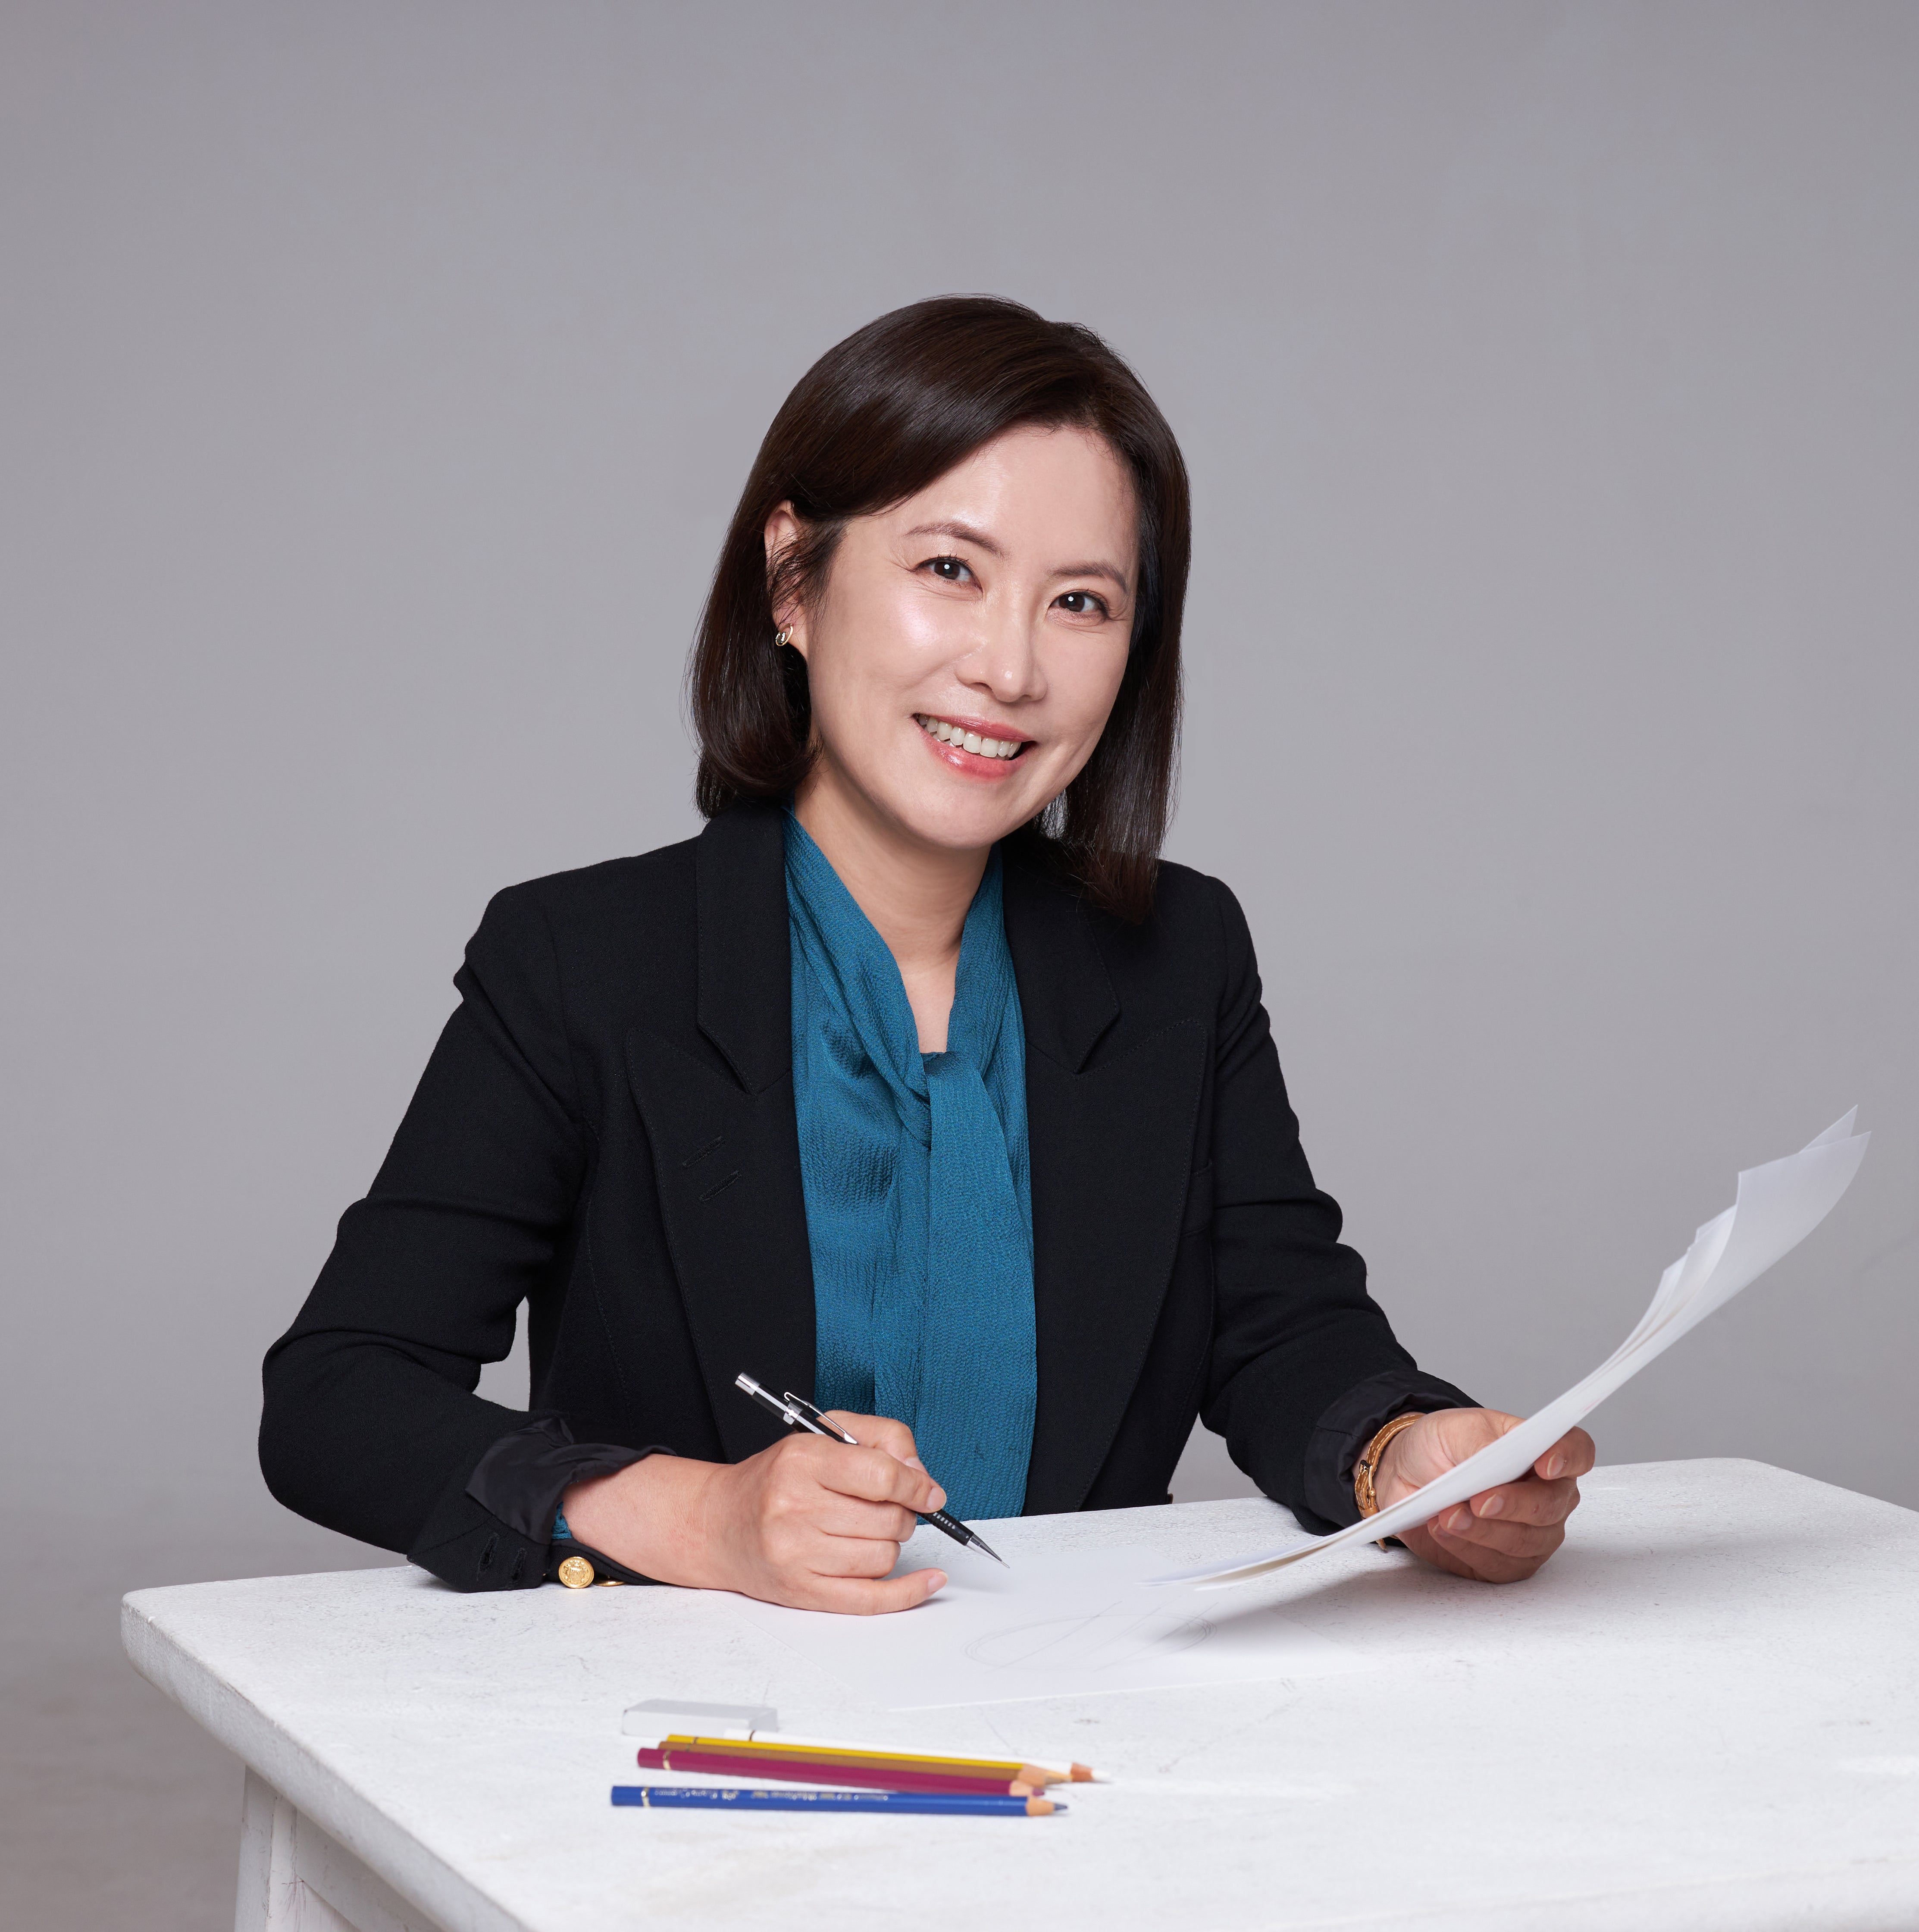 Headshot of Veniroe's designer, Gemma Park, smiling in a blue blouse and holding a pen